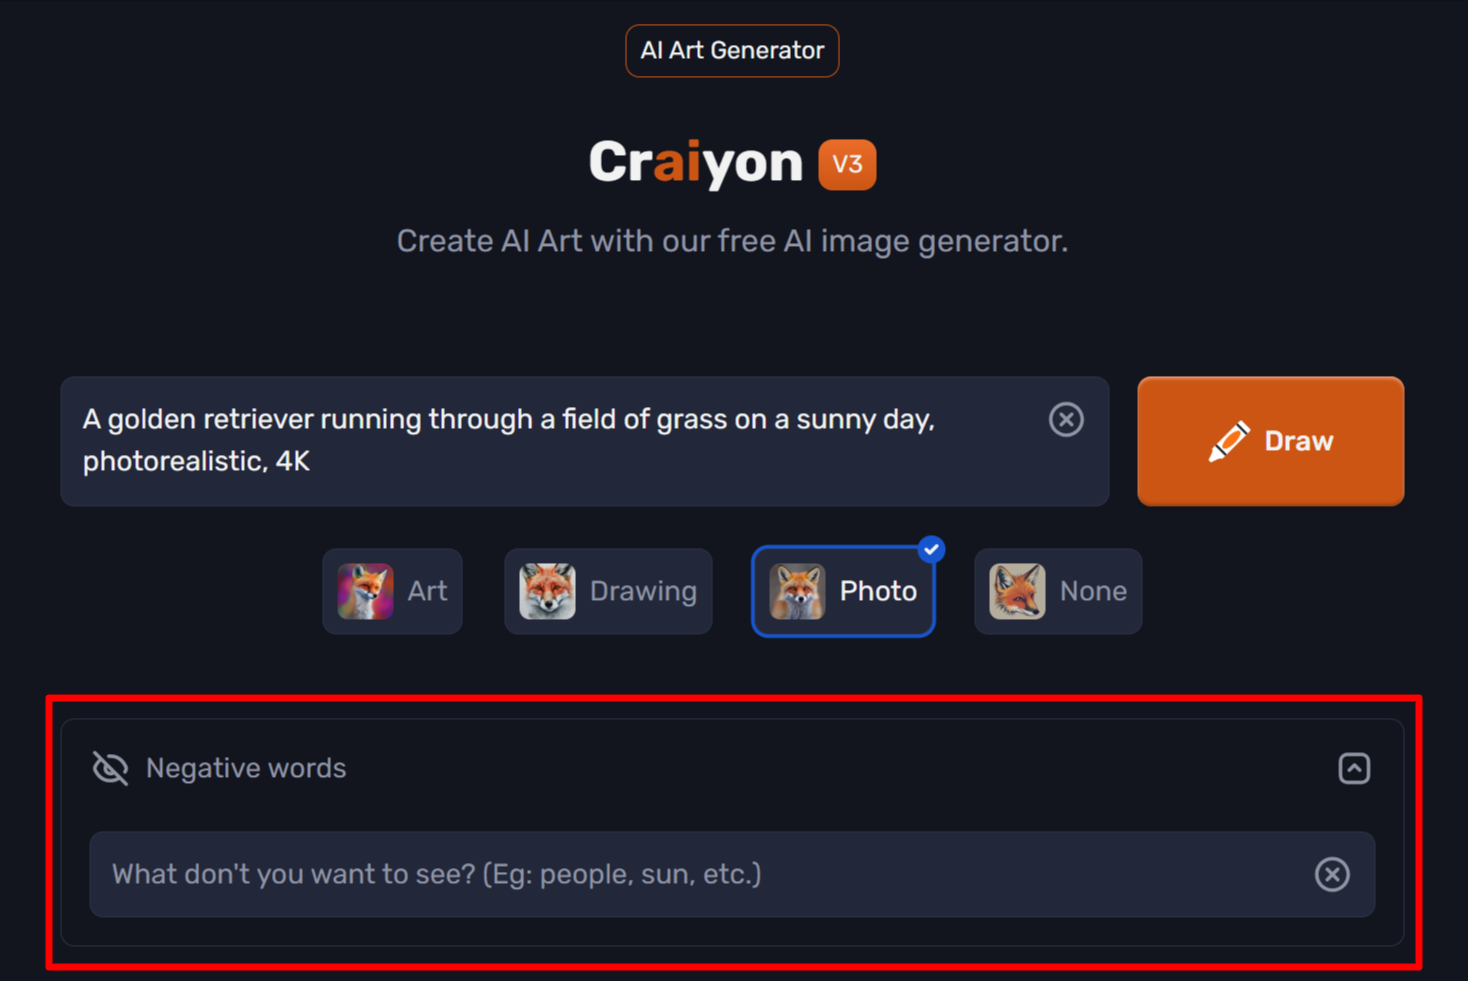 The option to add negative words when using Craiyon AI.